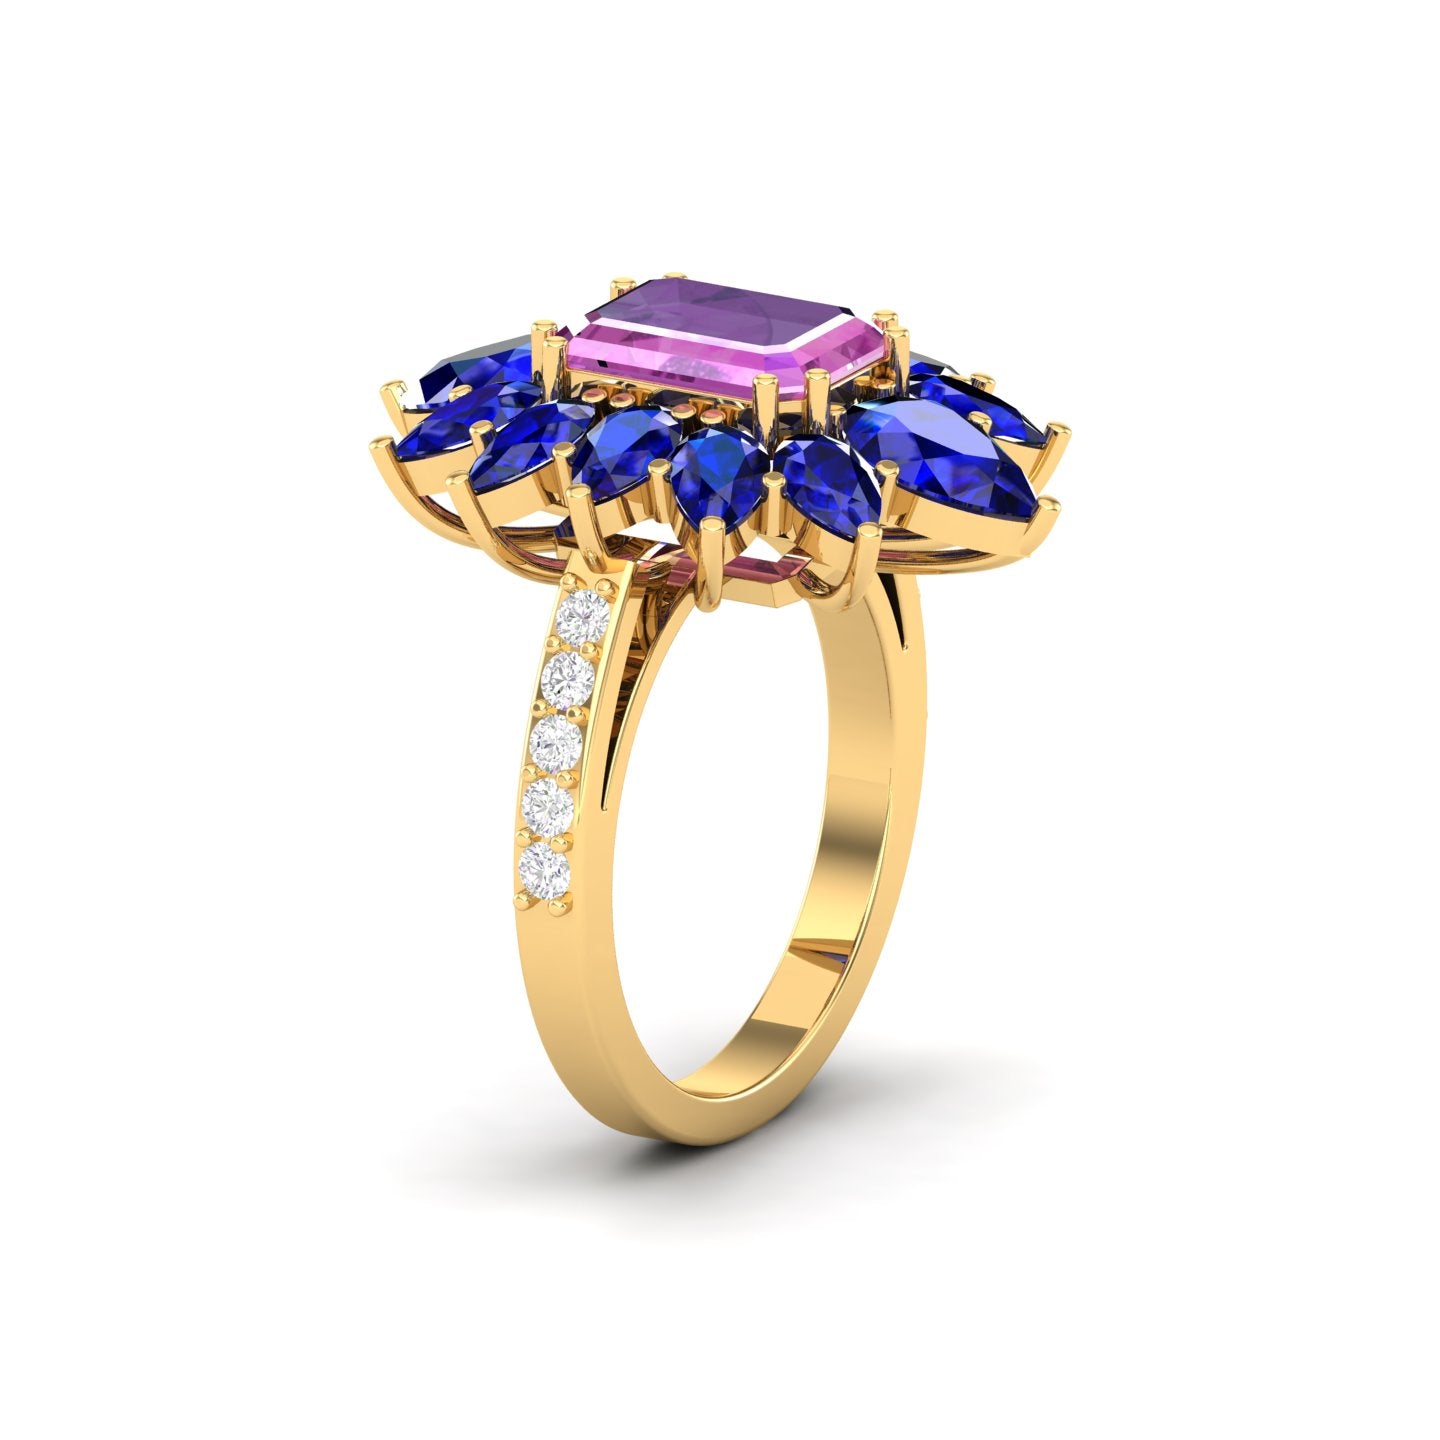 Maurya Solitaire Pink Amethyst Big Pollen Engagement Ring with Sapphire Halo